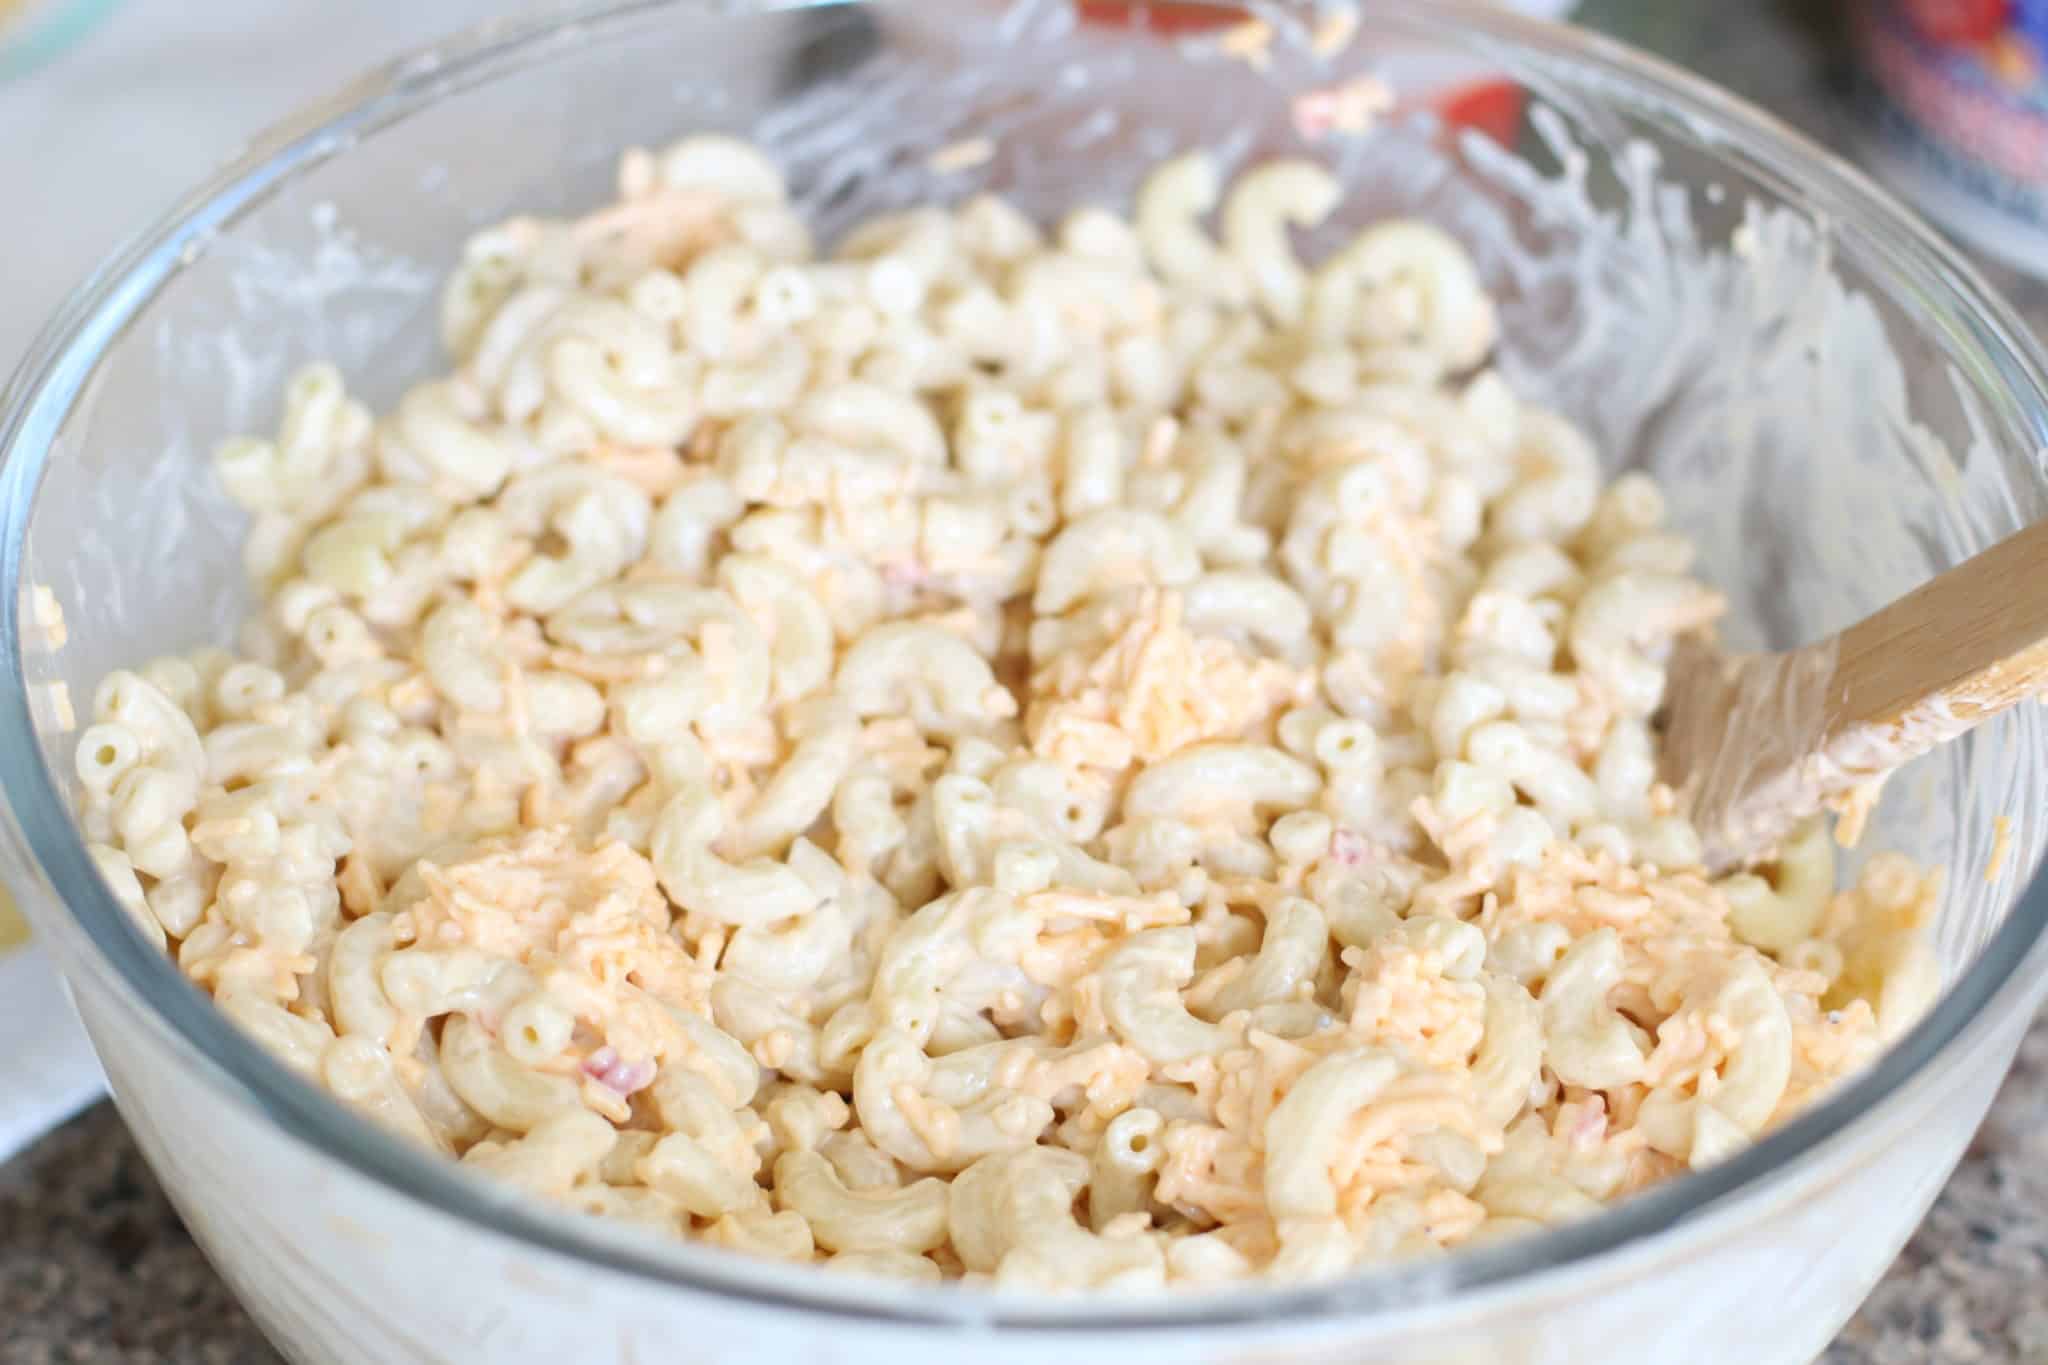 macaroni salad with pimiento cheese and mayonnaise mixture in a large clear bowl.